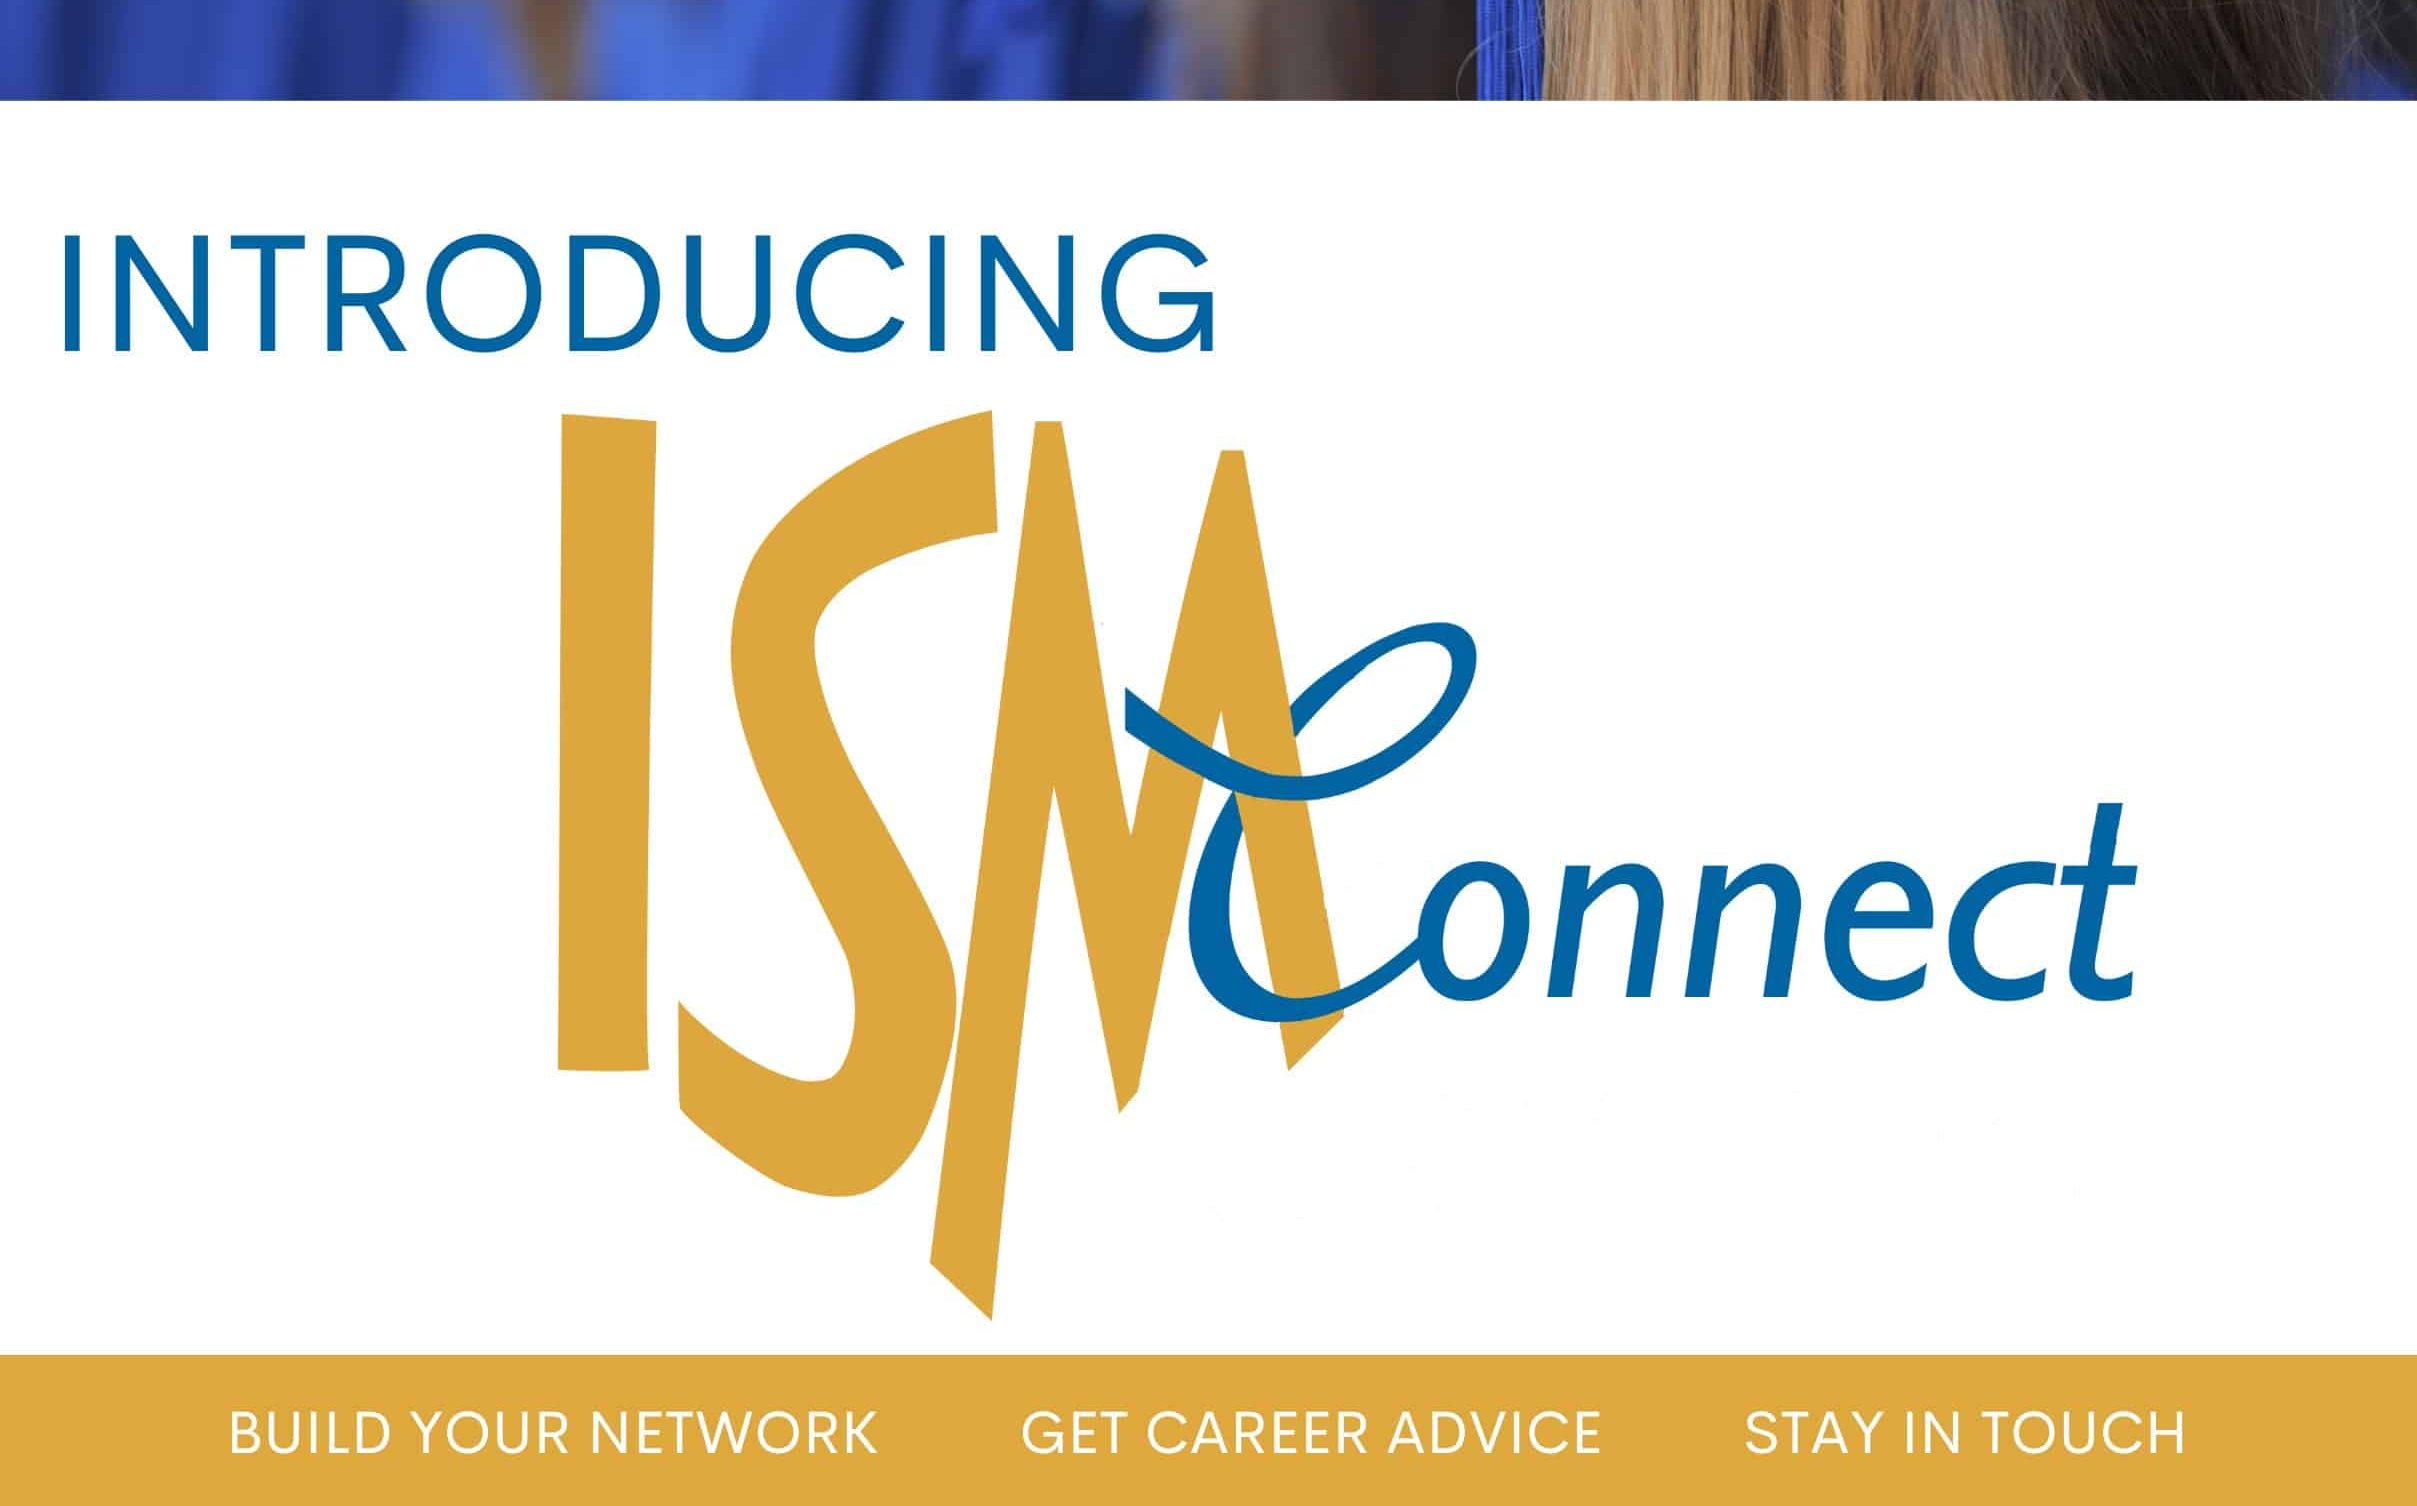 ISM launches ISMconnect Image